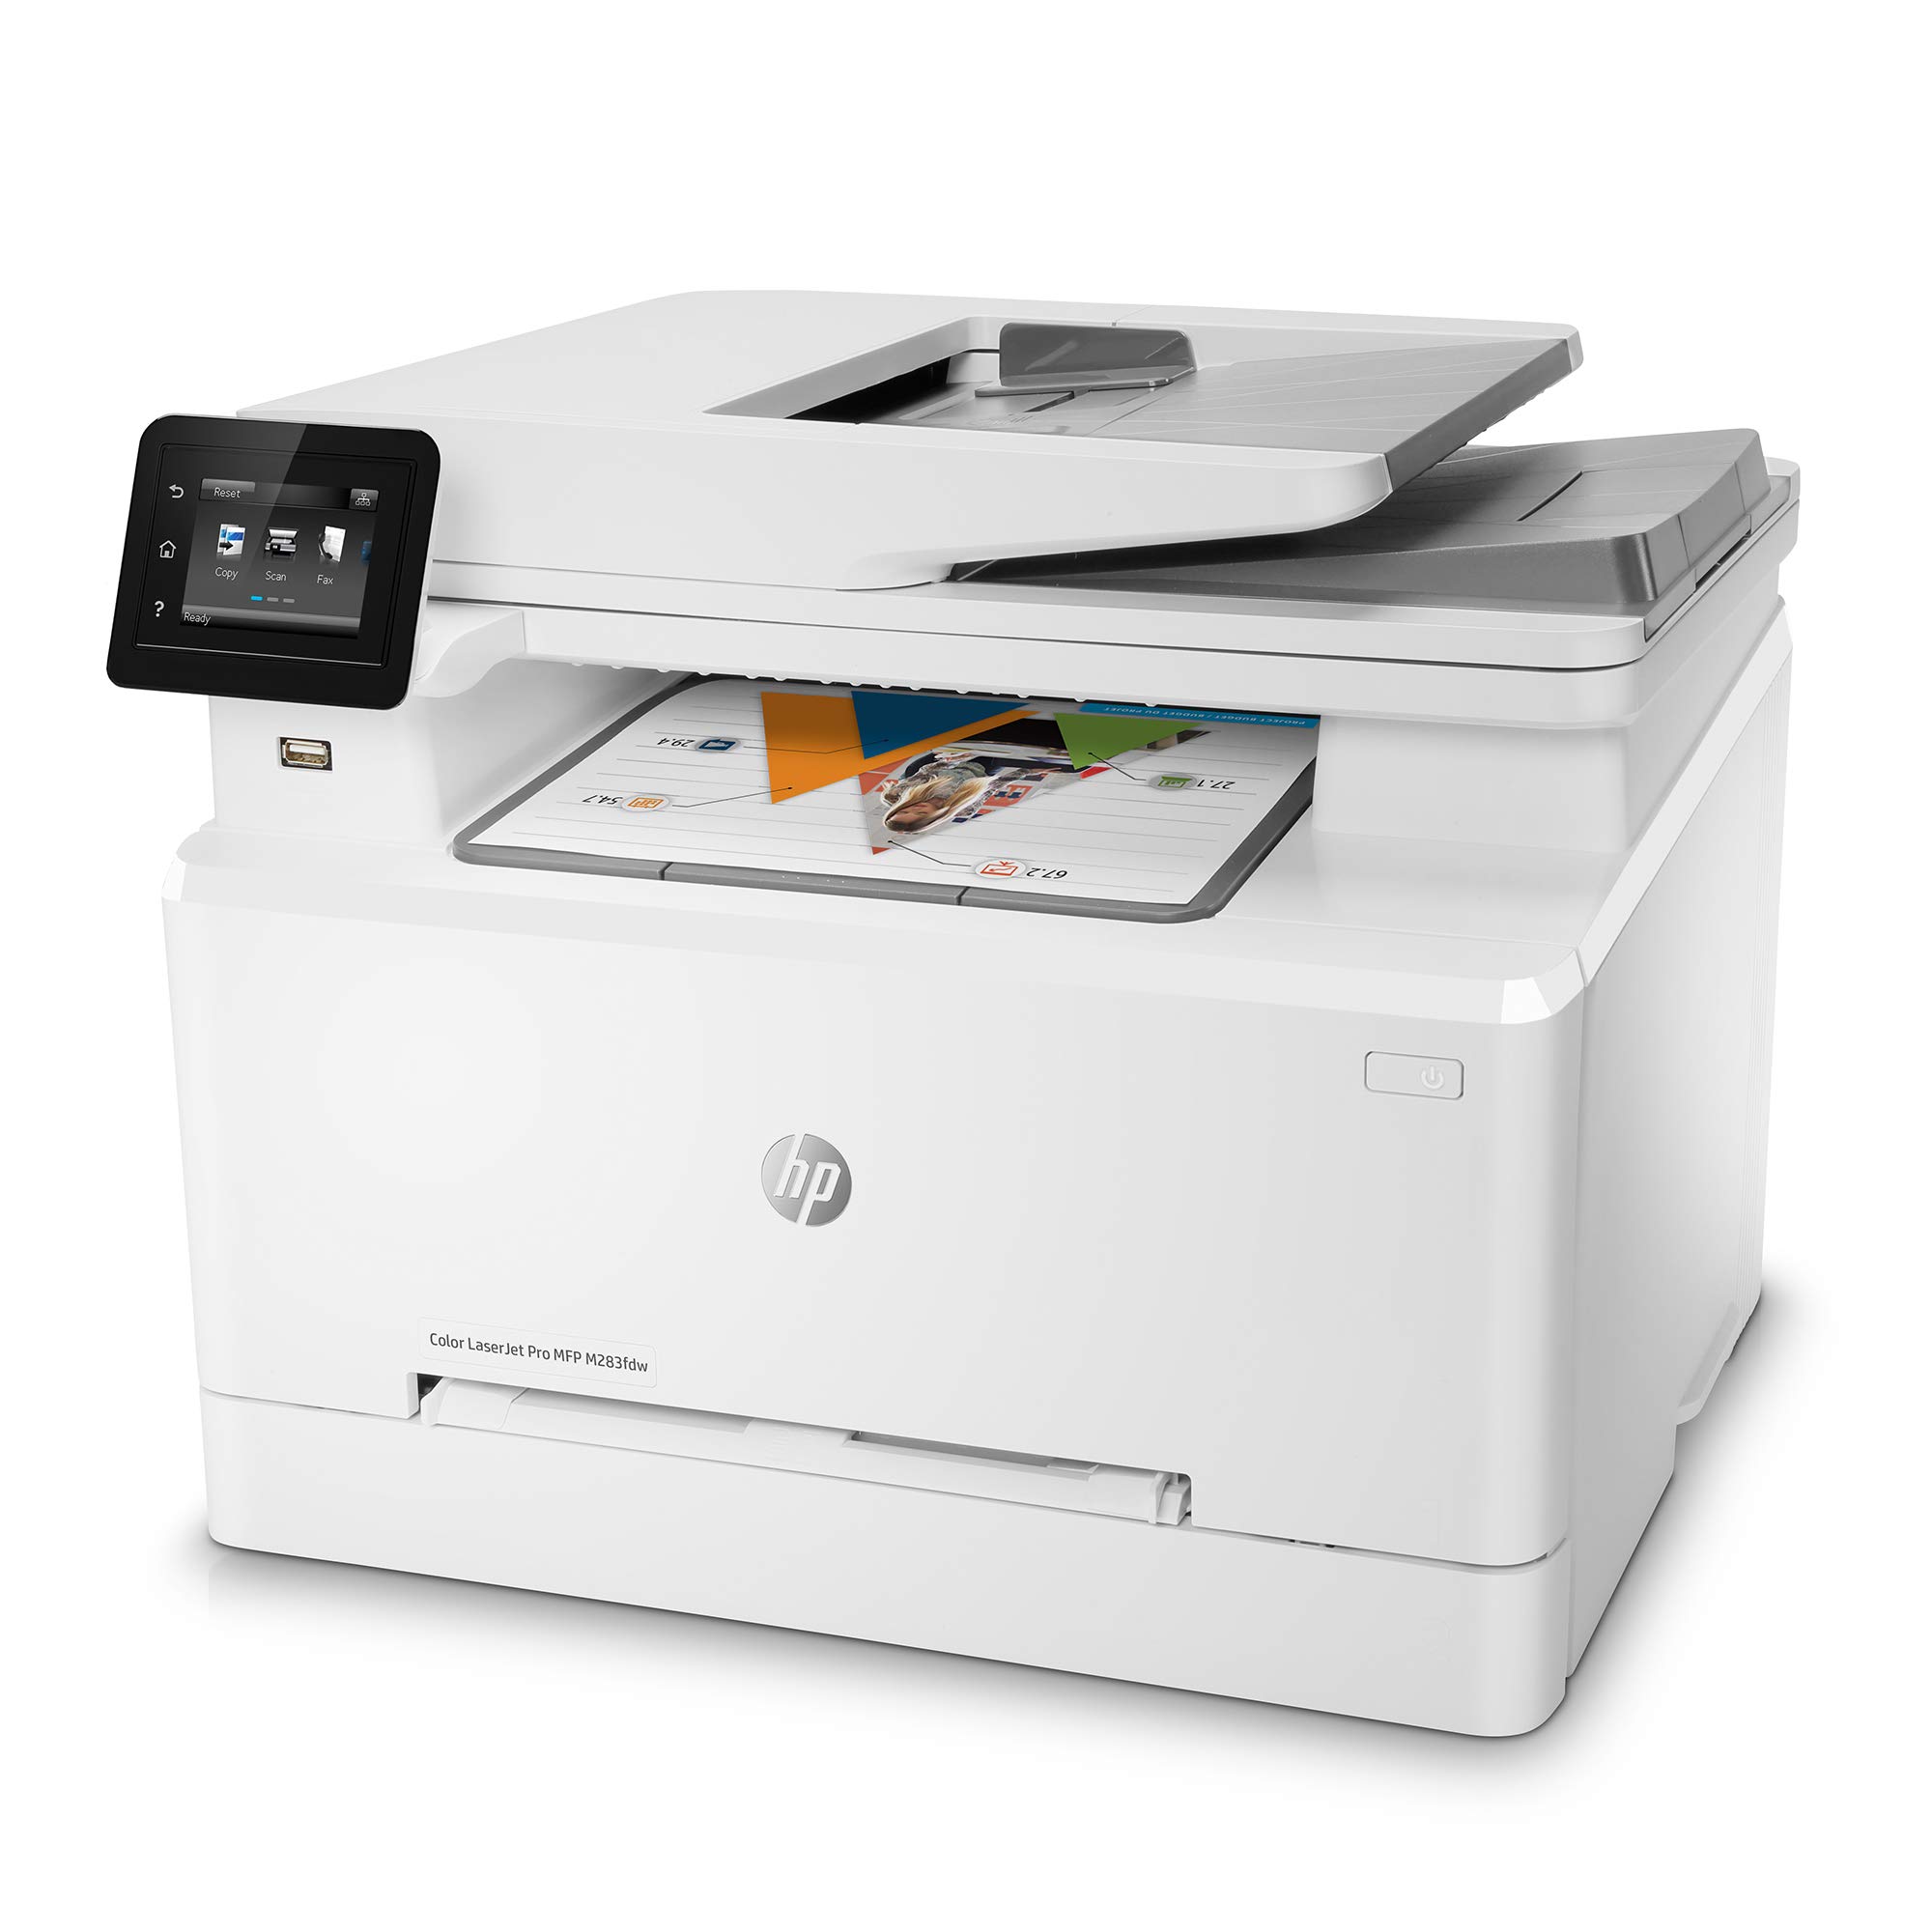 HP Color LaserJet Pro M283fdw Wireless All-in-One Laser Printer, Remote Mobile Print, Scan & Copy, Duplex Printing, Works with Alexa (7KW75A), White